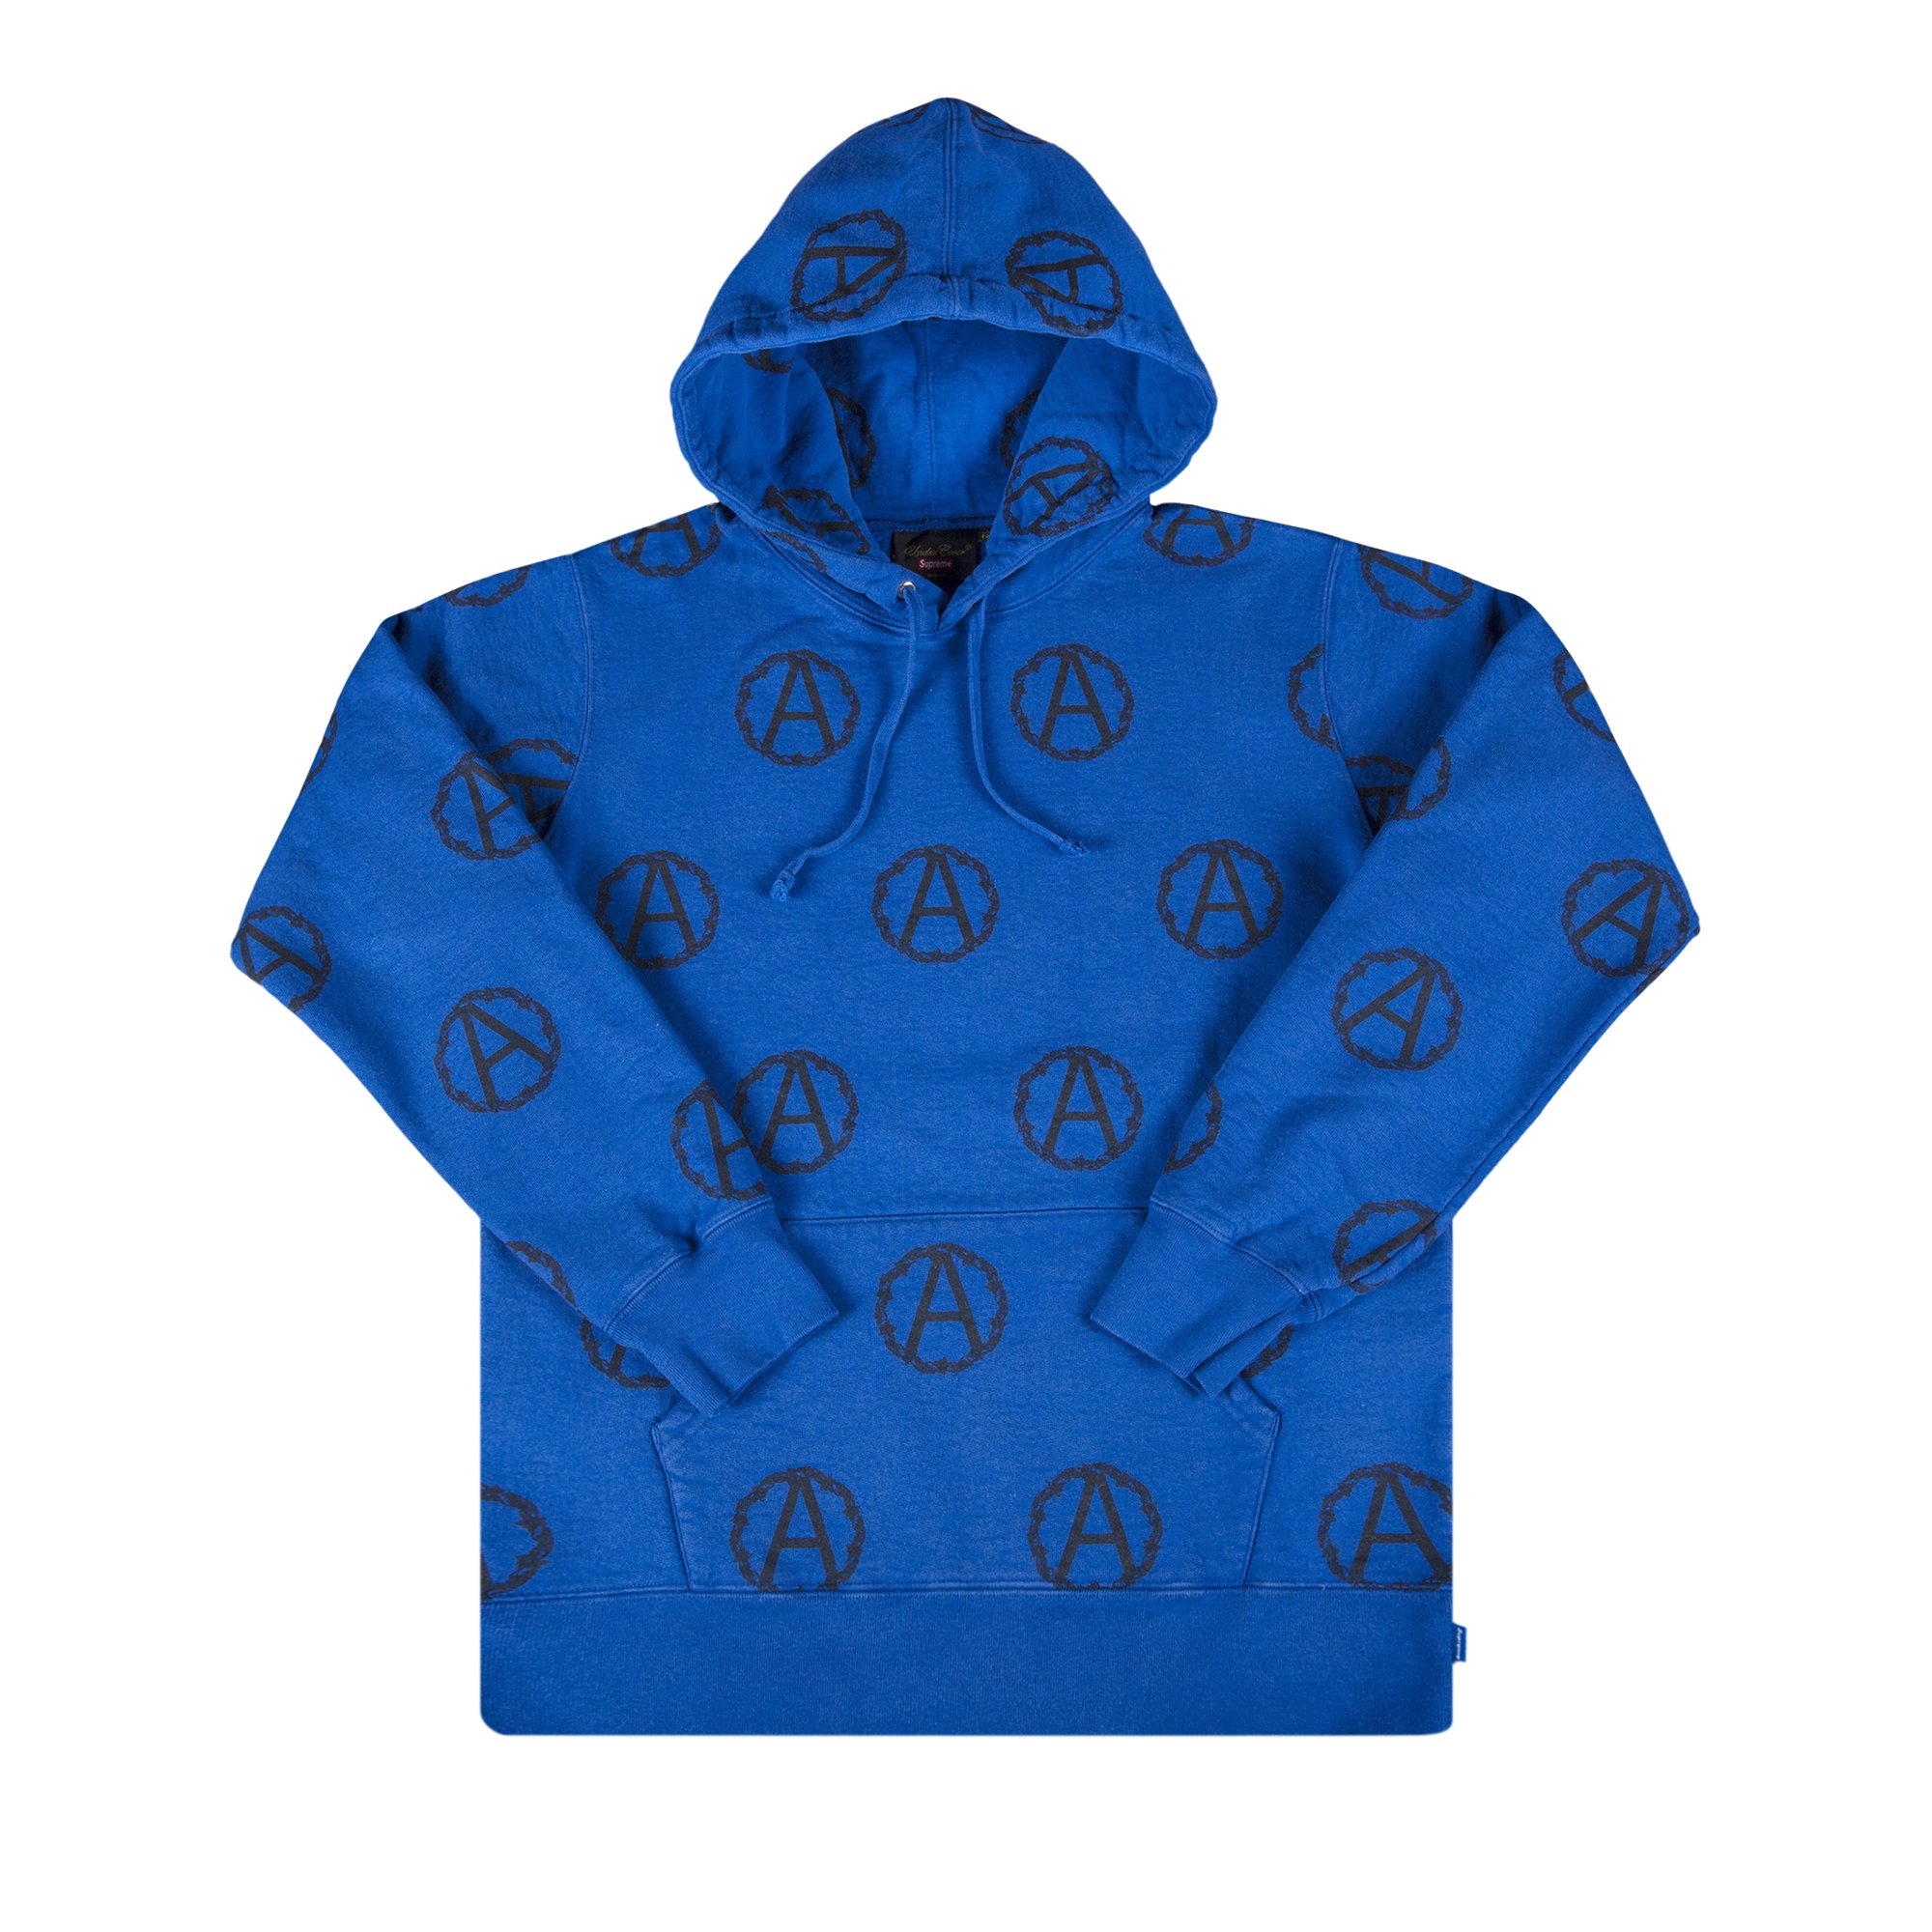 Buy Supreme x Undercover Anarchy Hooded Sweatshirt 'Royal Blue